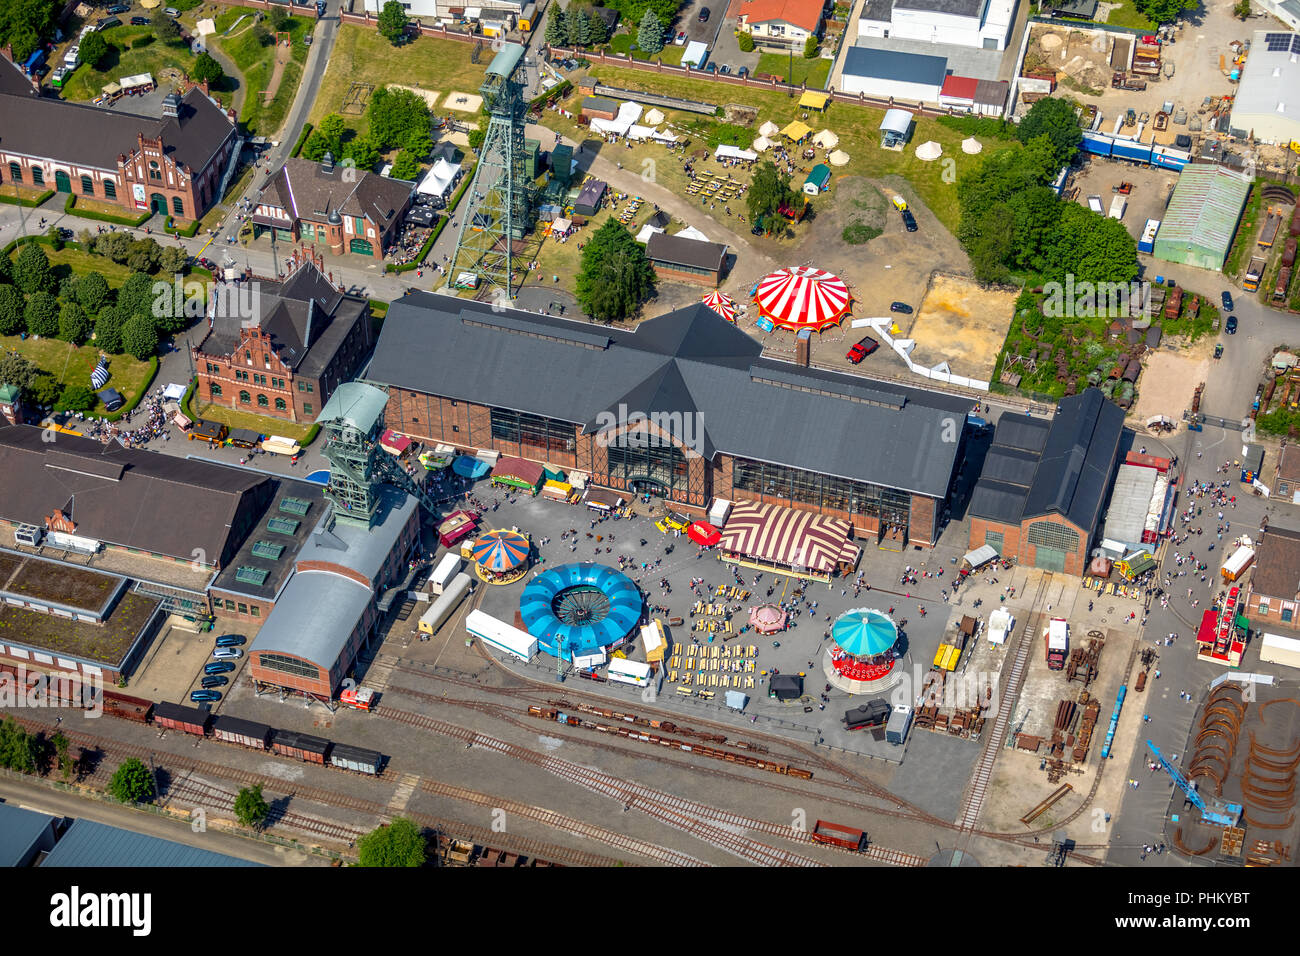 Aerial photo, Zollern colliery historical fair ,Festival on the grounds of Zollern colliery, LWL-Industriemuseum - Westfälisches Landesmuseum für Indu Stock Photo